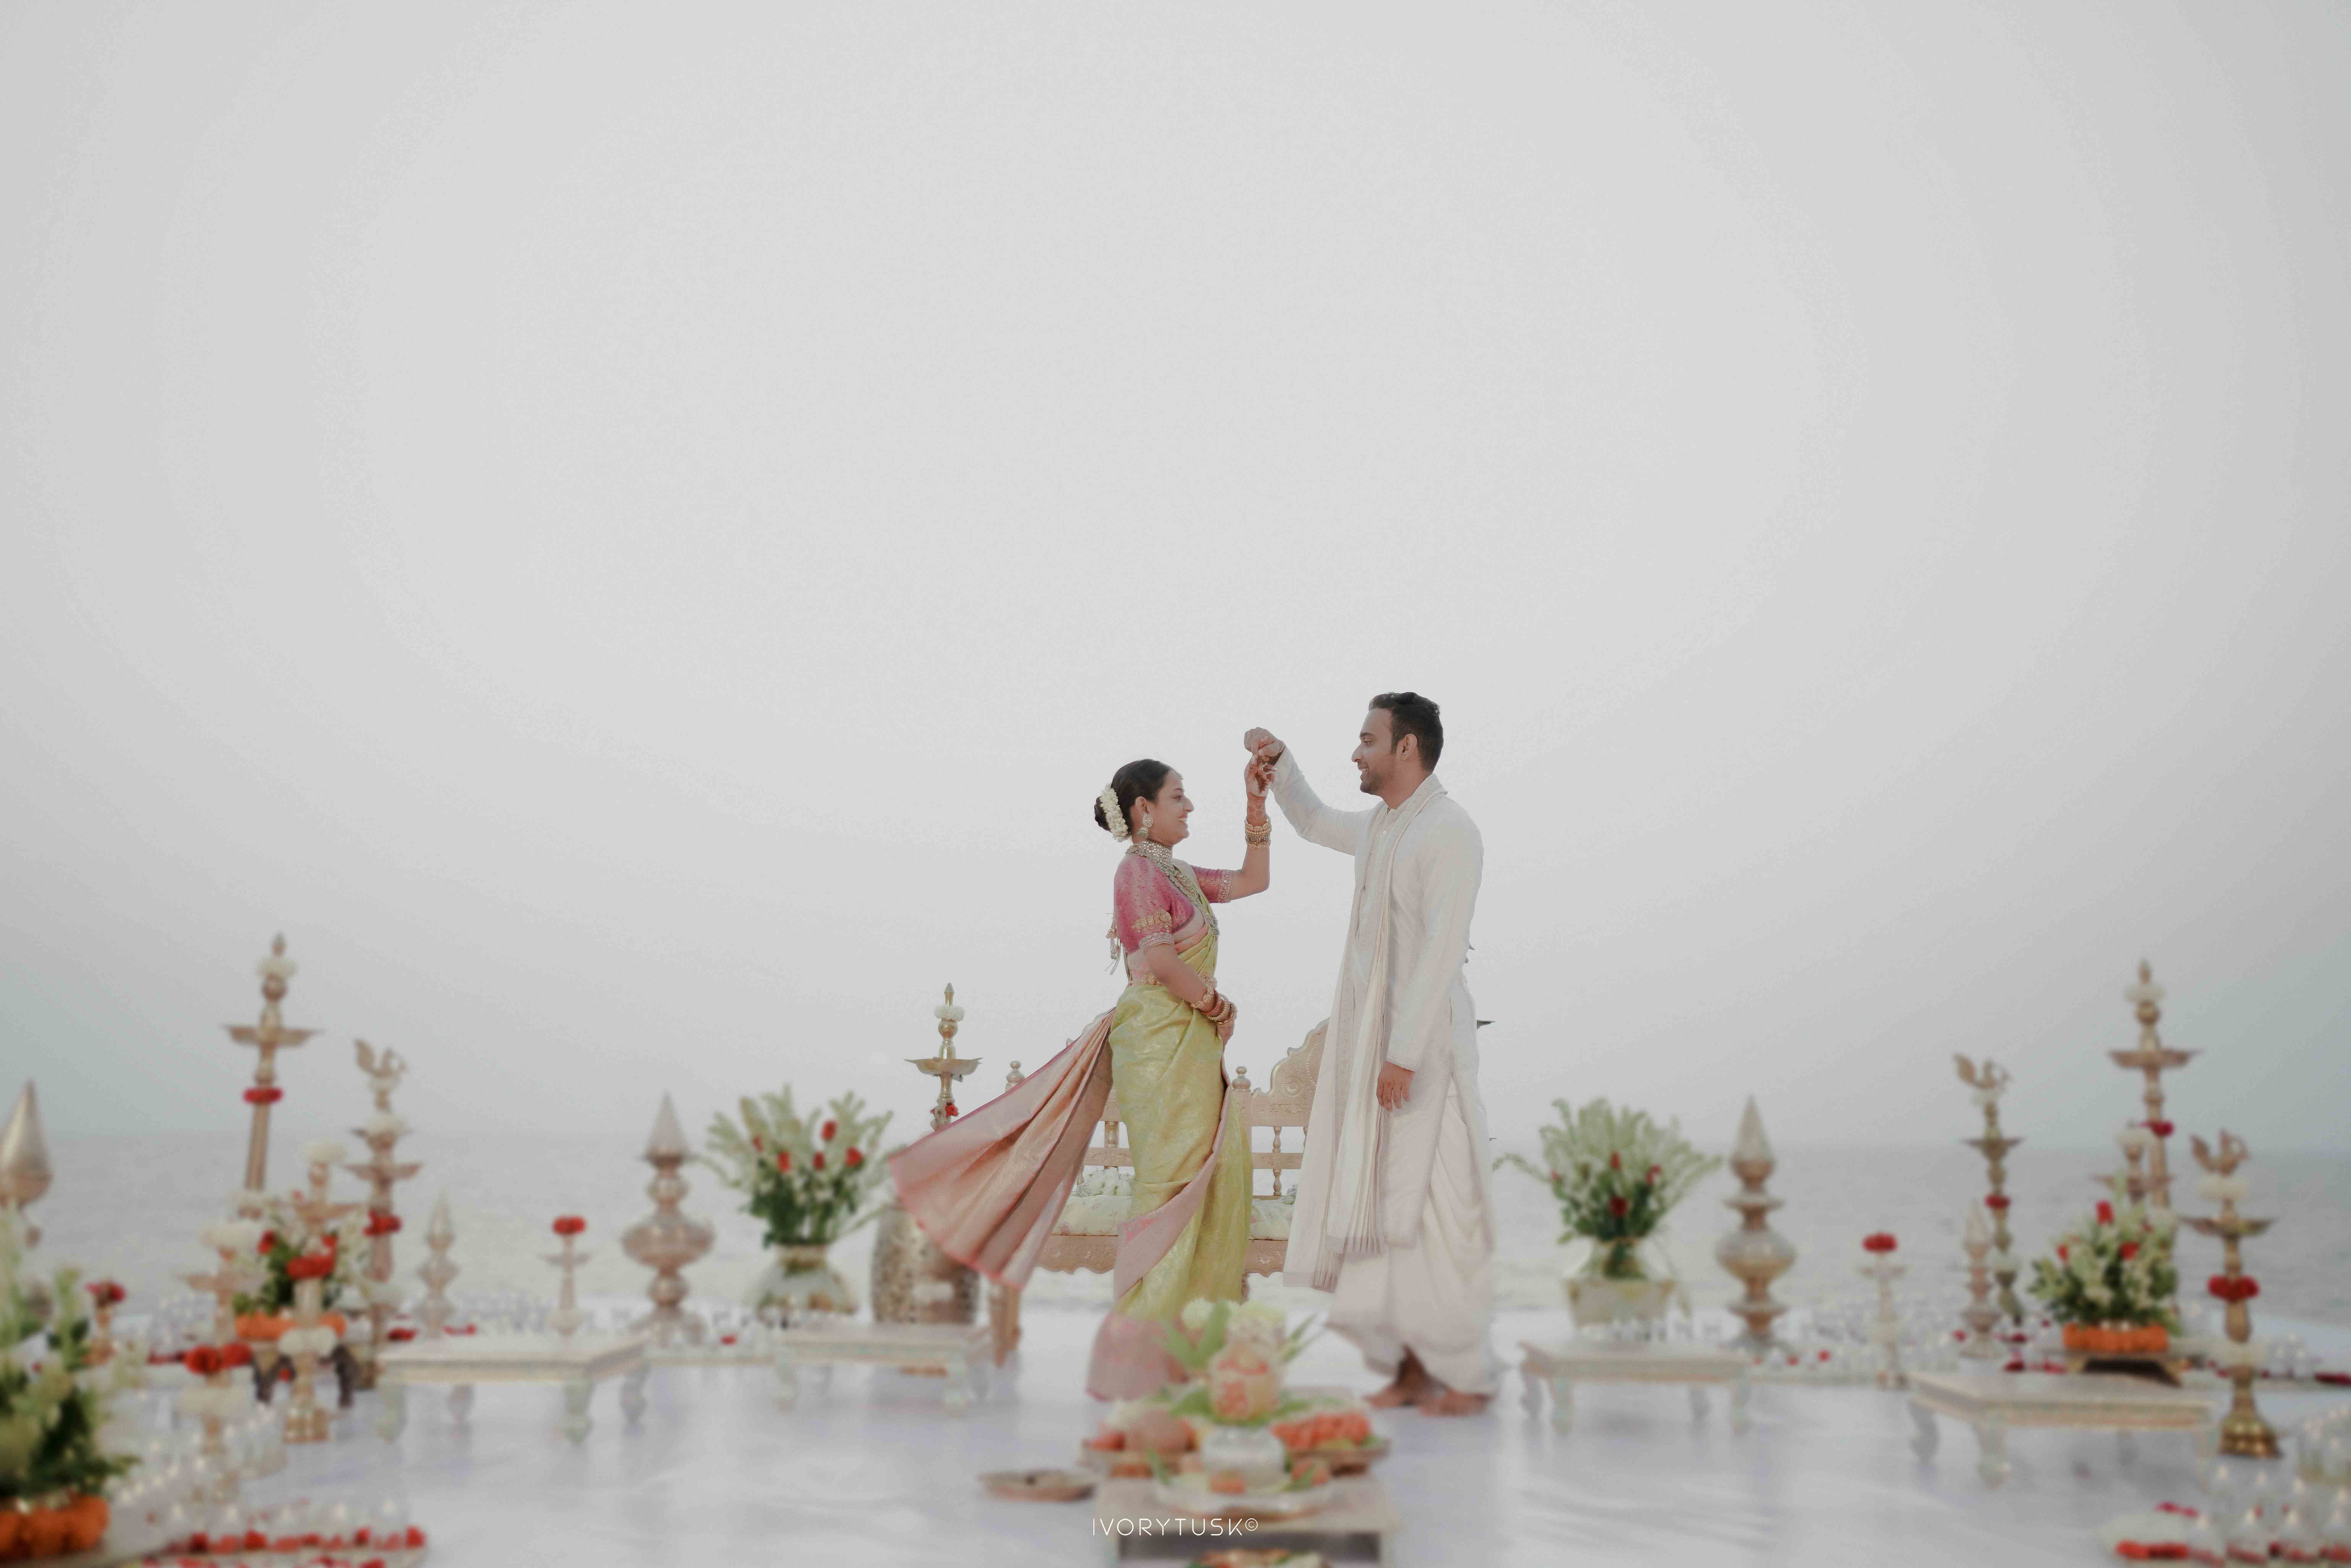 Redefining Traditions: How Millennials Are Transforming The Big Fat Indian Wedding